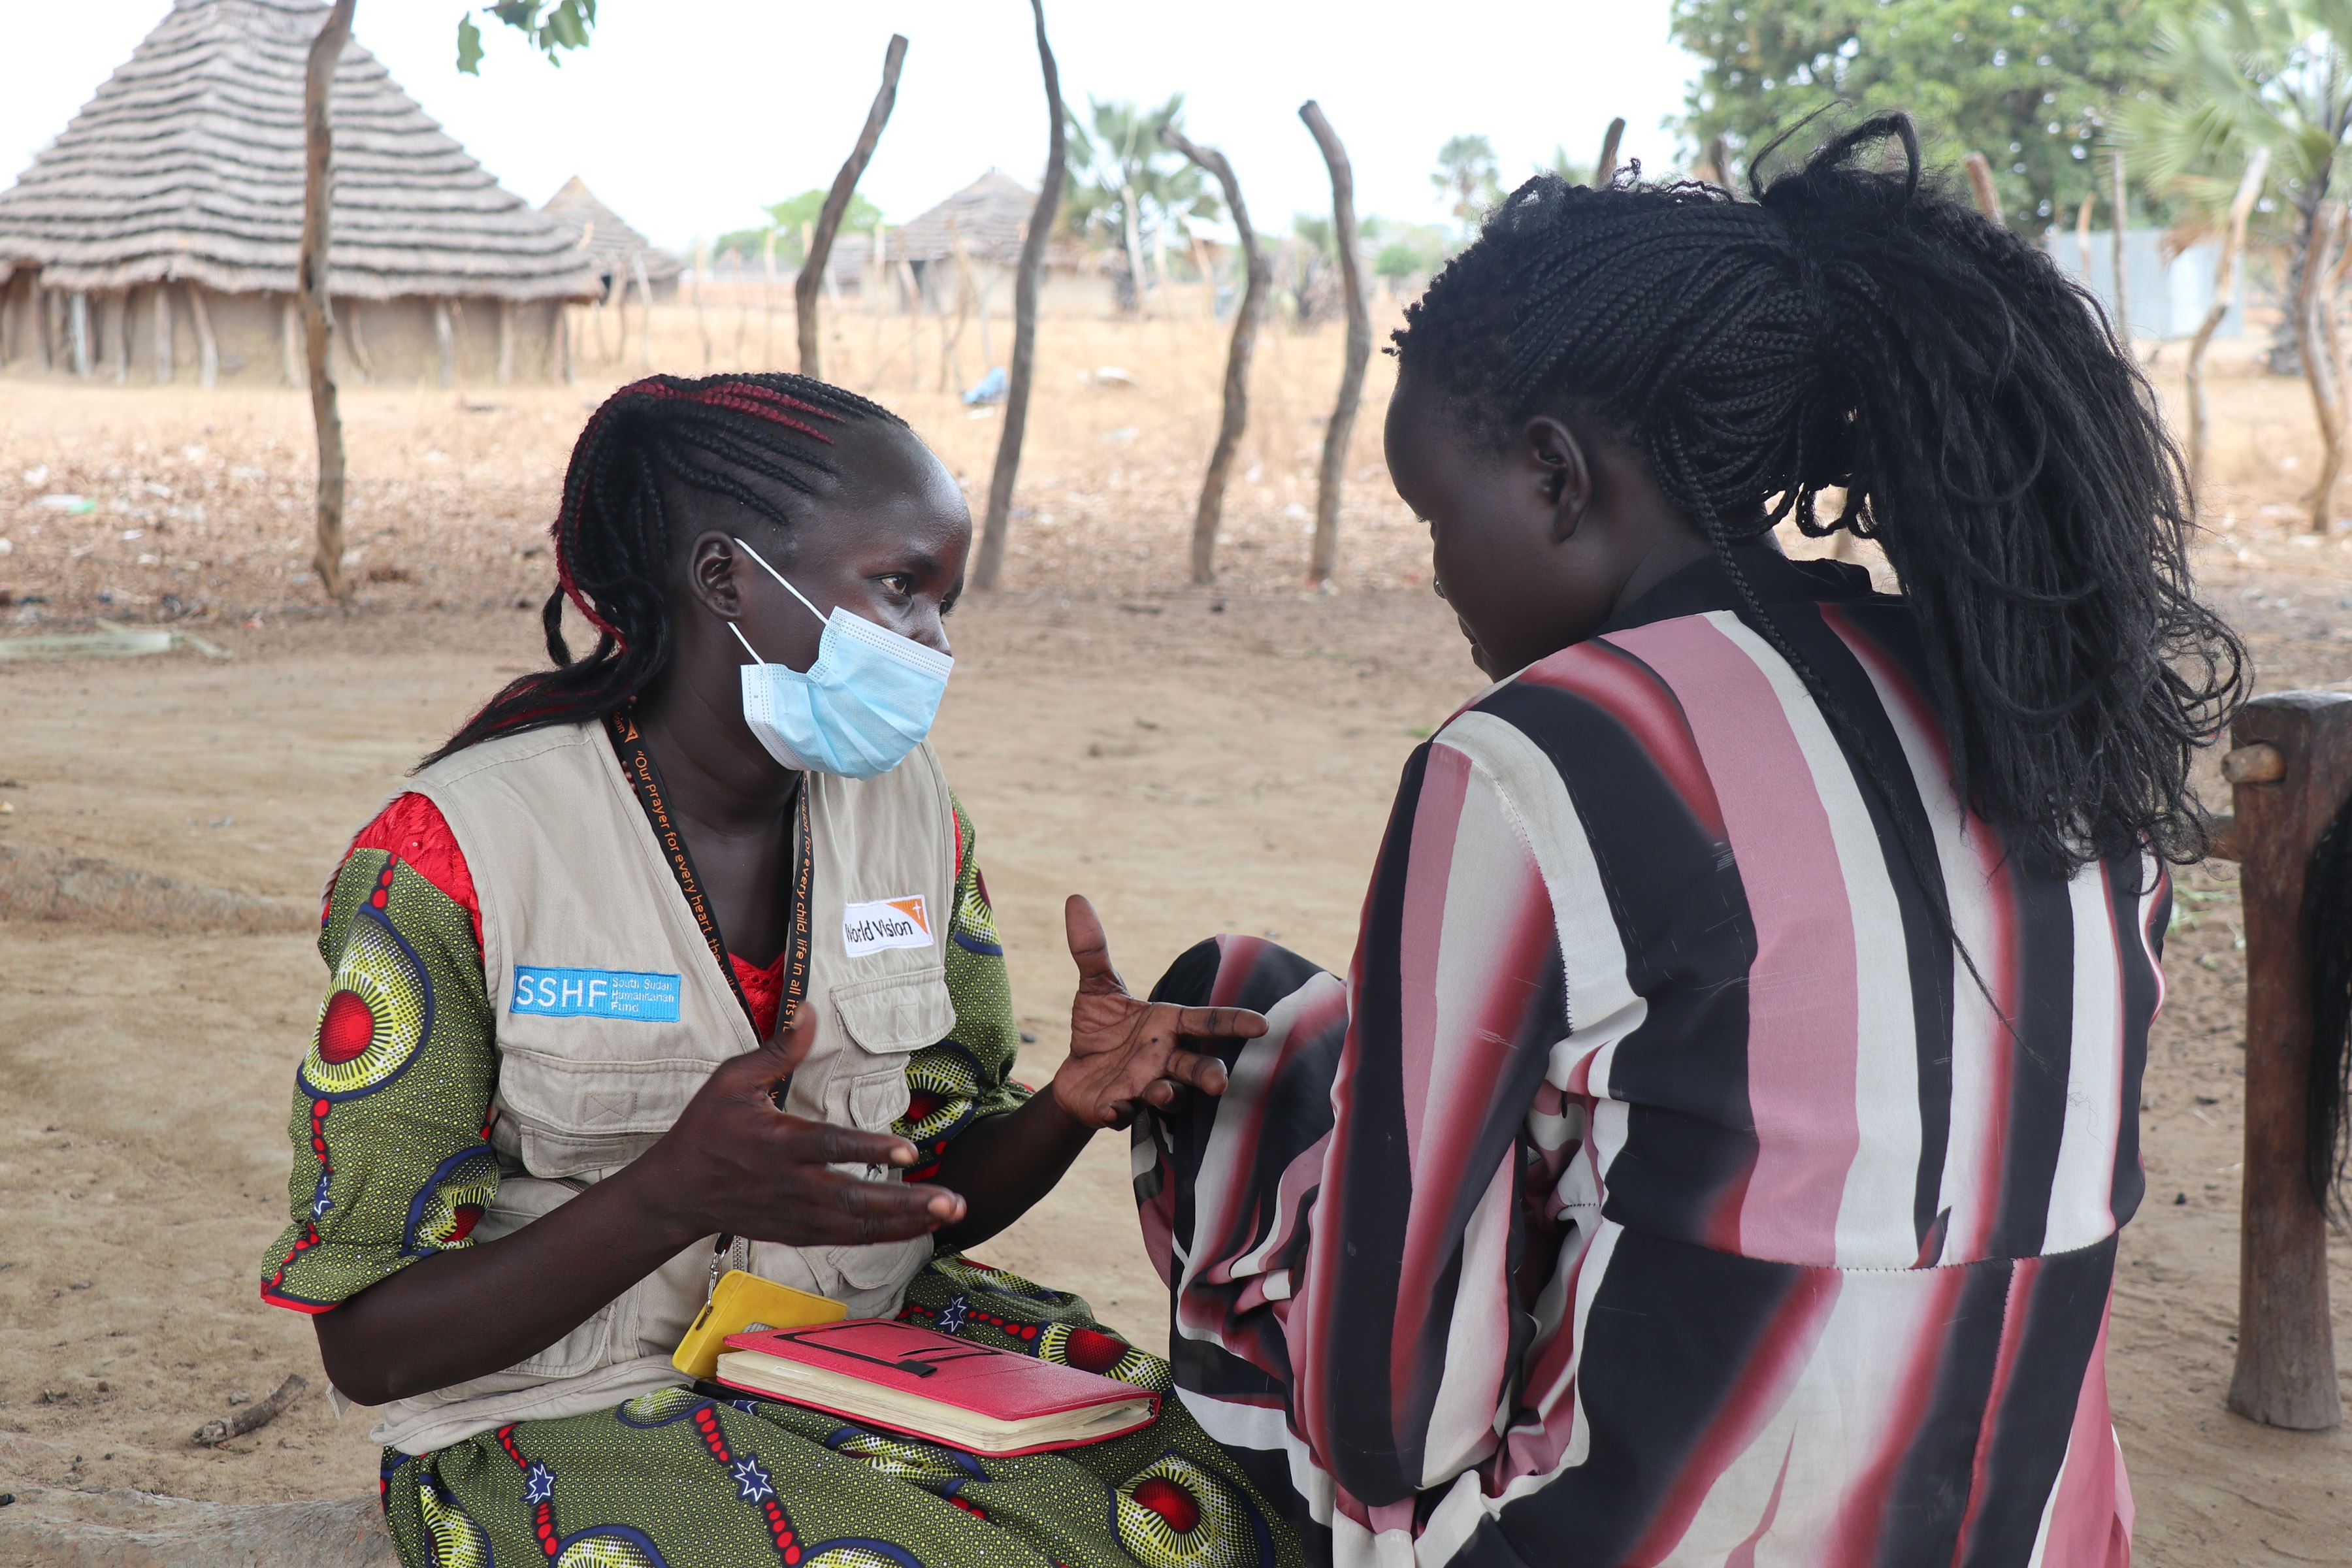 World Vision’s Social Worker Pasquina Diu interacts with South Sudanese girl Katina in one of her visits.